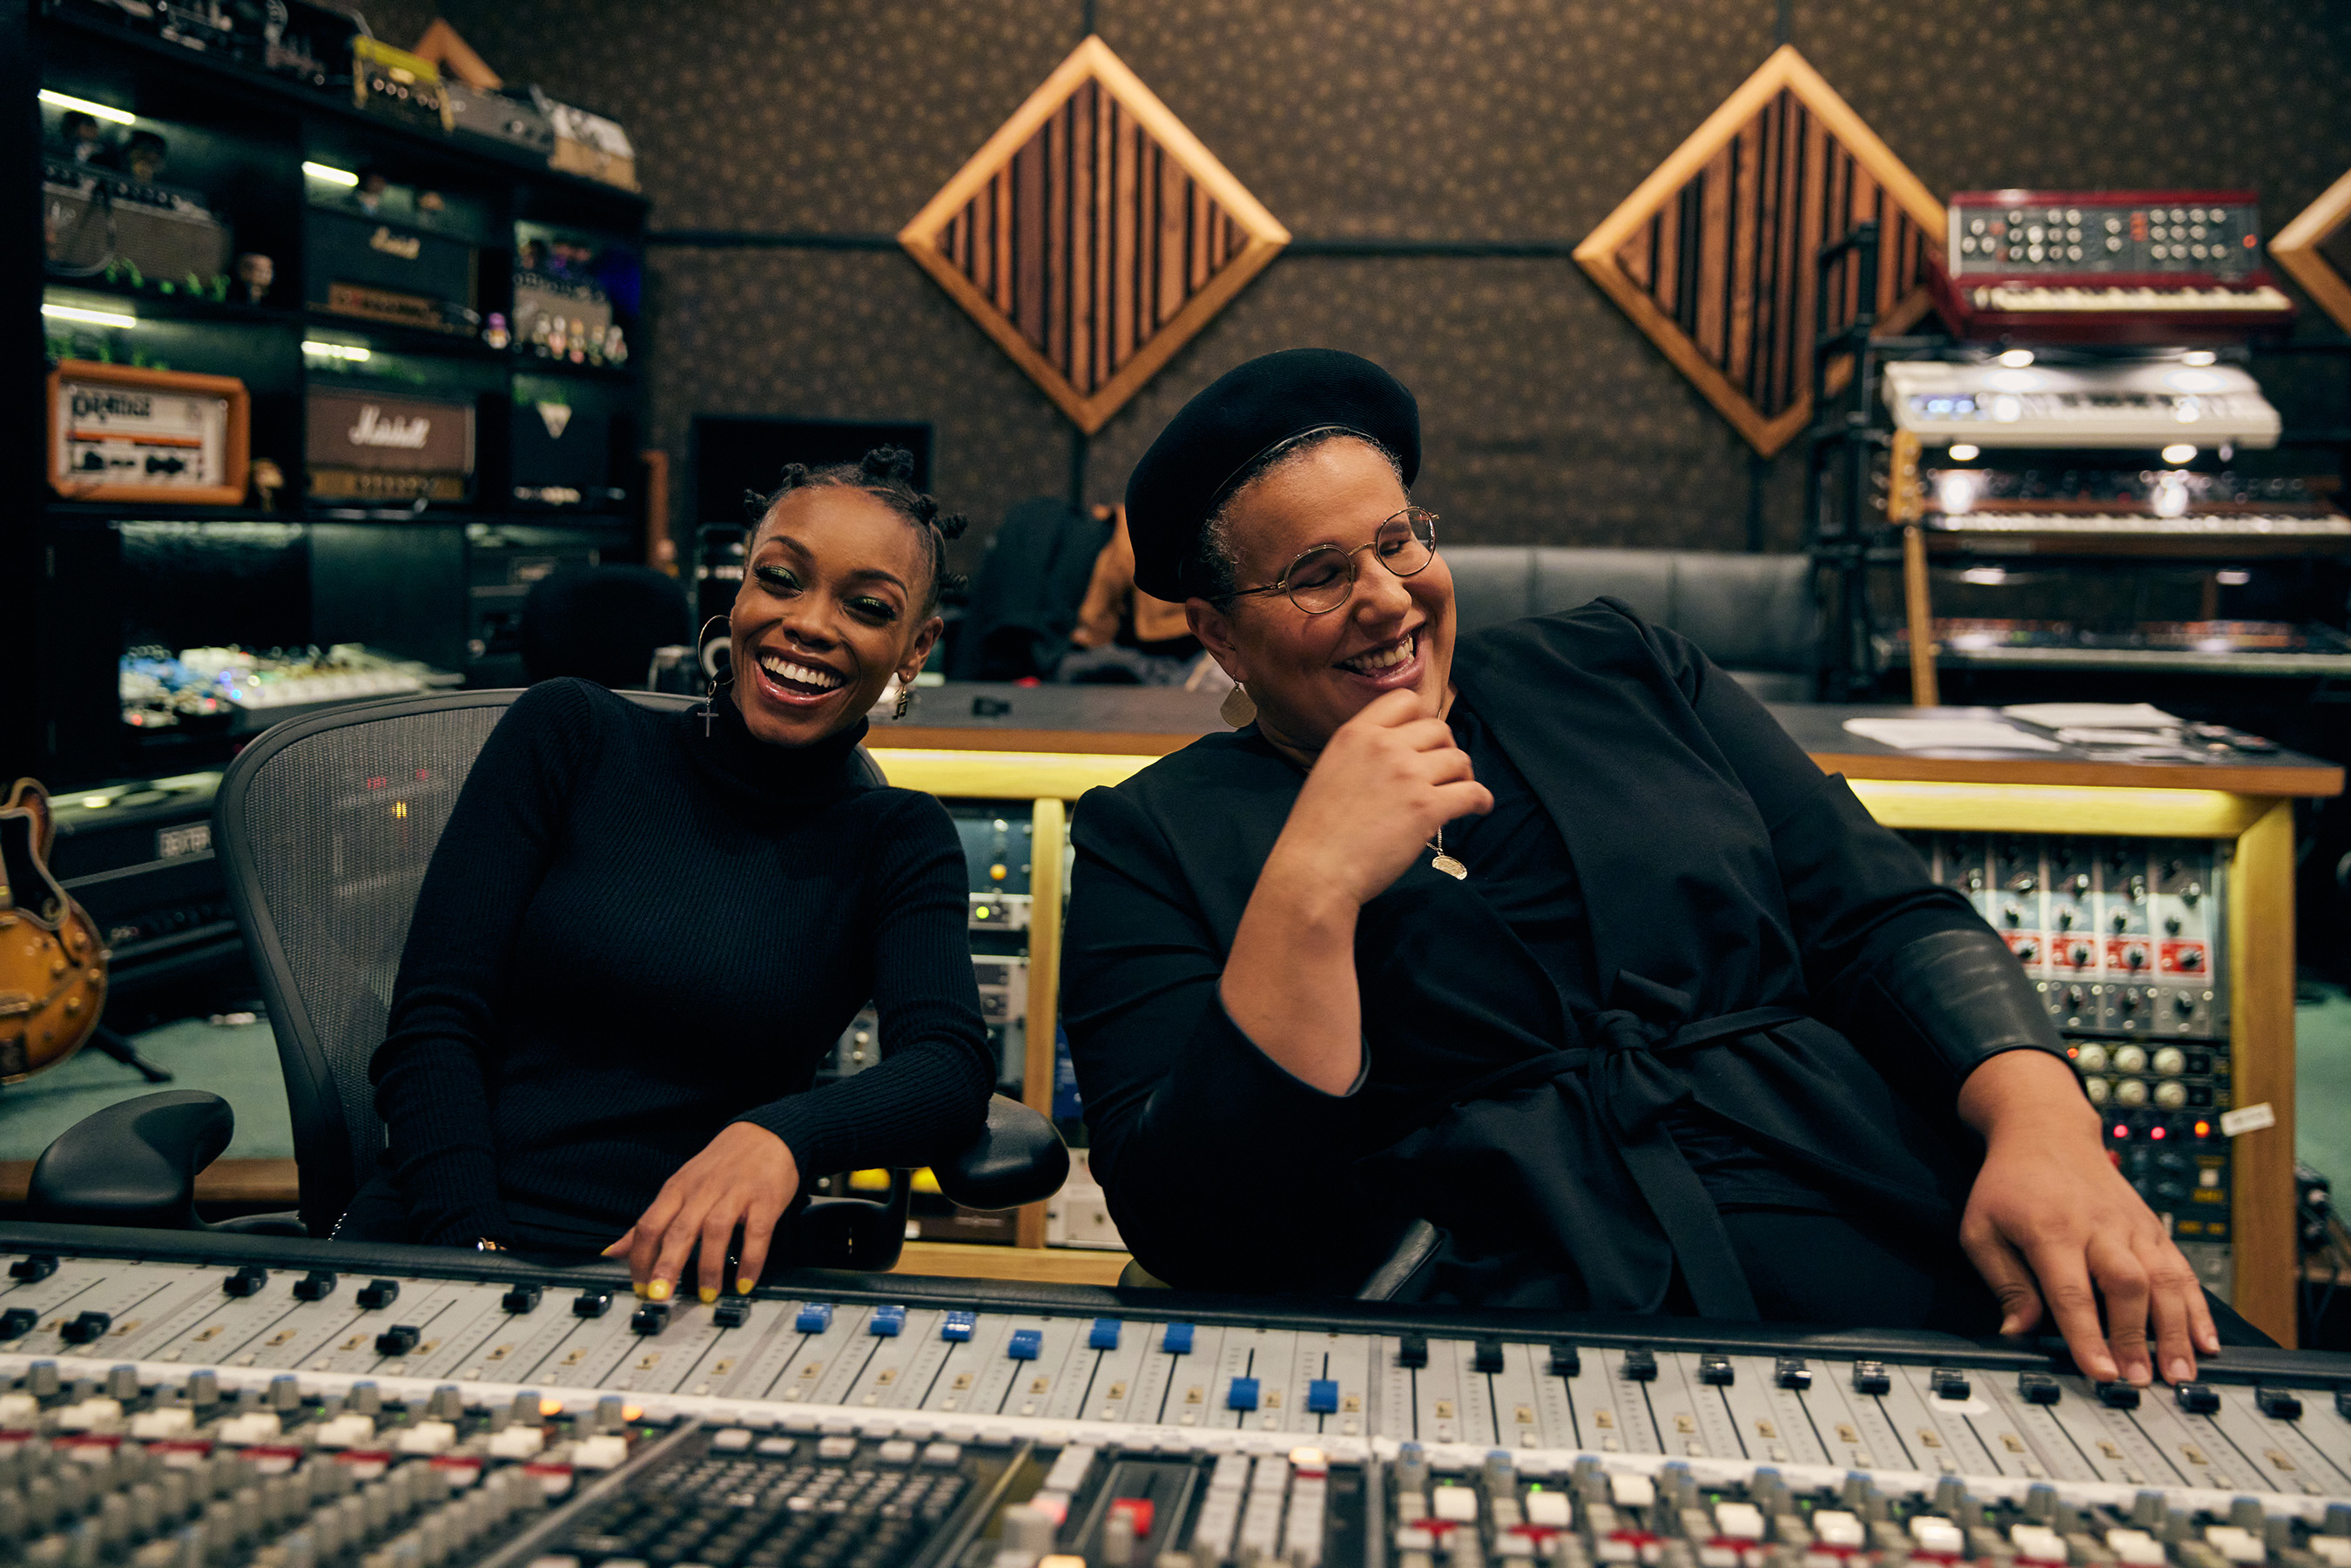 Johnnie Walker tapped Grammy Award-winning artist Brittany Howard and LA’s Tia P. to create the official anthem of ACFC “Running with the Angels.”